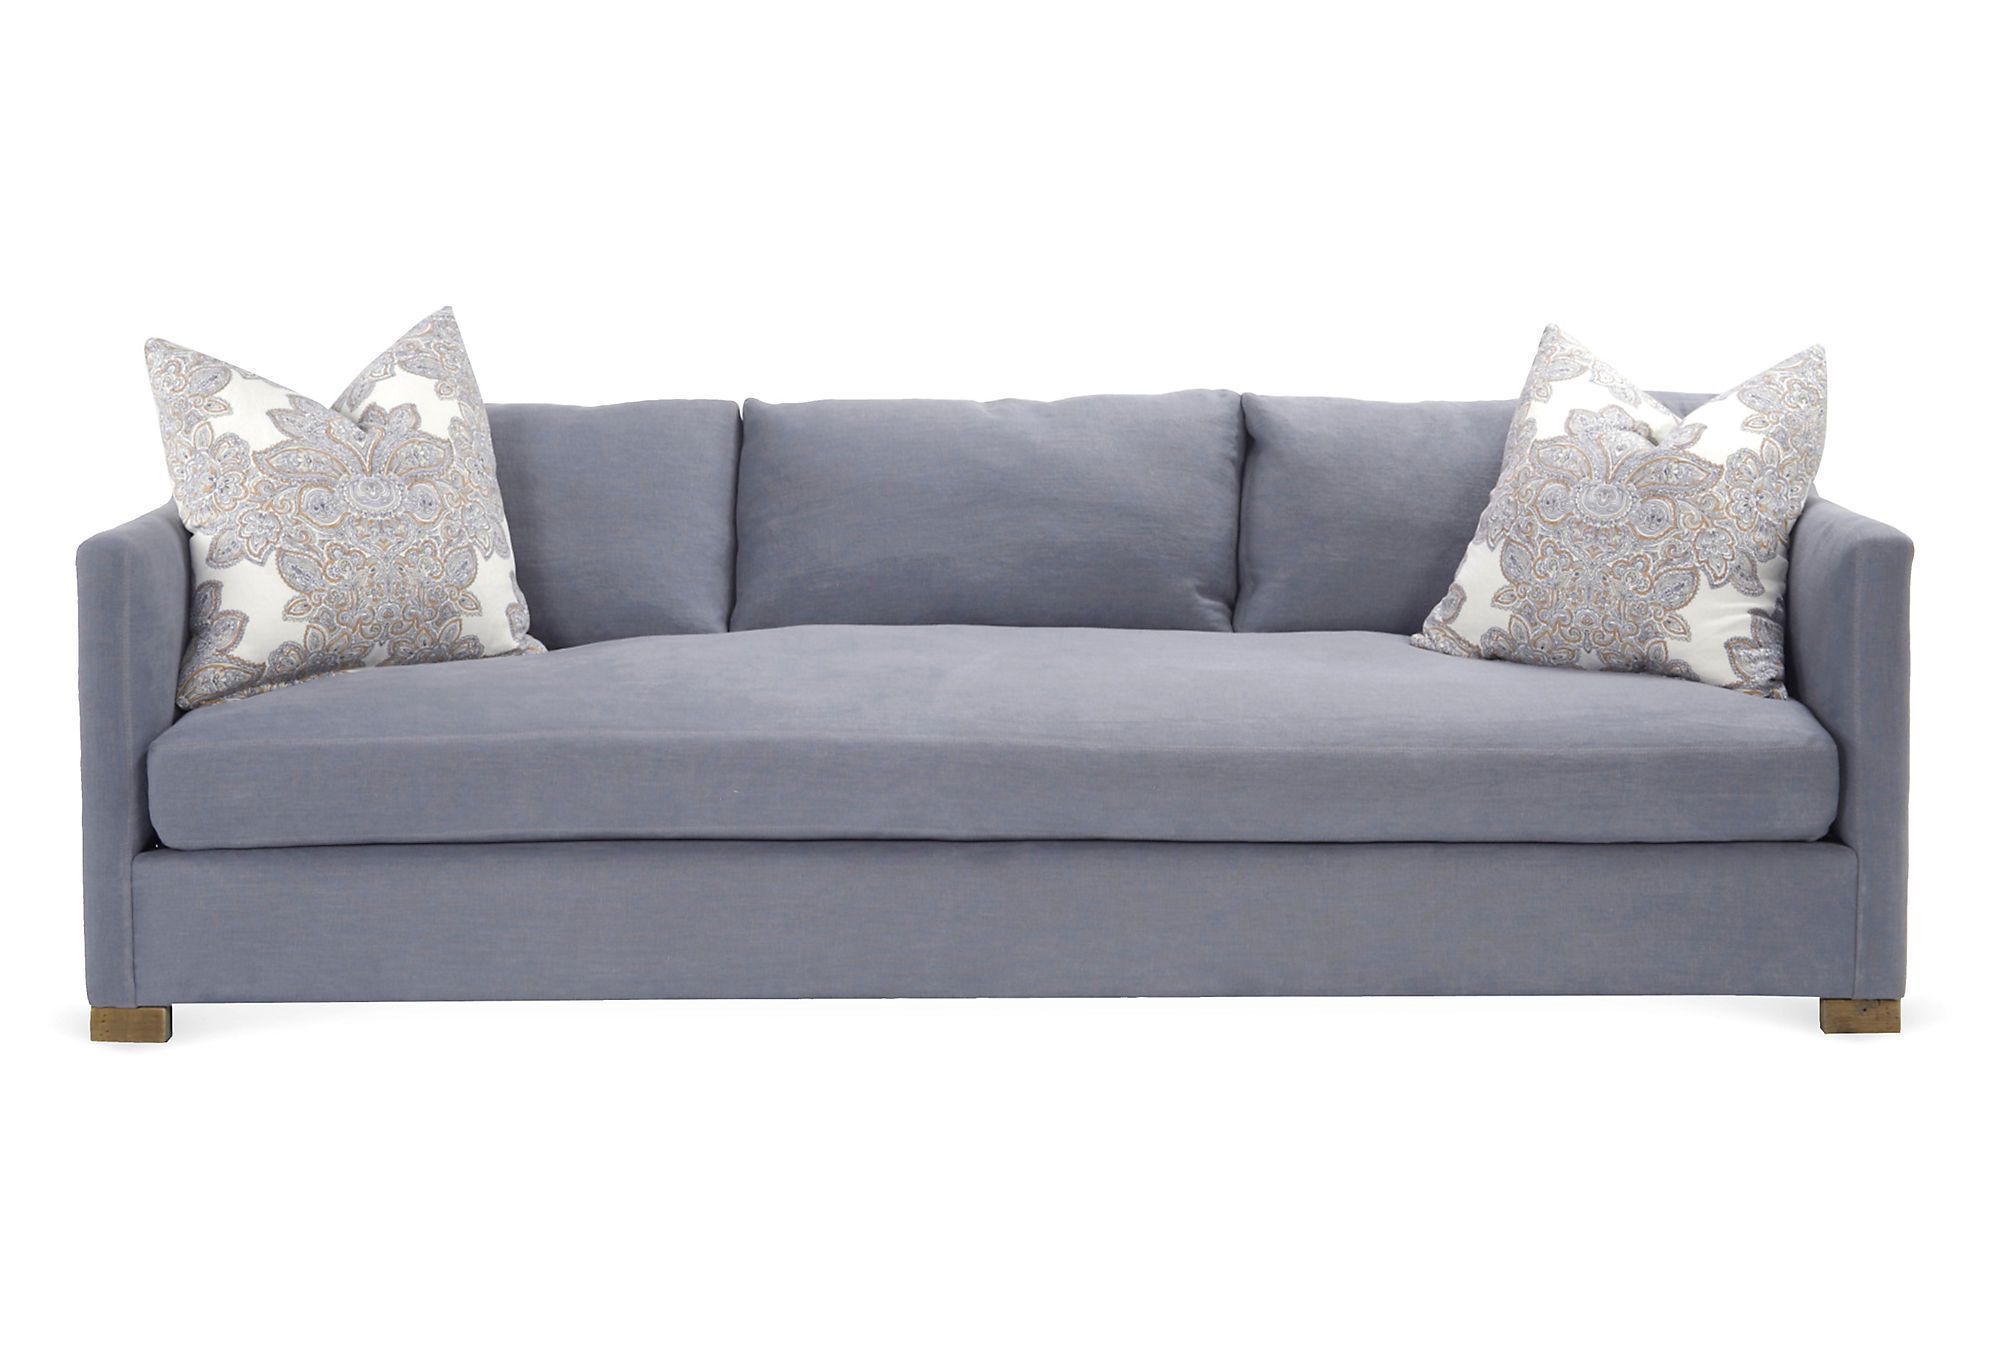 Corinne 96" Linen Sofa, Dusty Blue | Sofa, Linen Sofa With Brayson Chaise Sectional Sofas Dusty Blue (View 4 of 15)